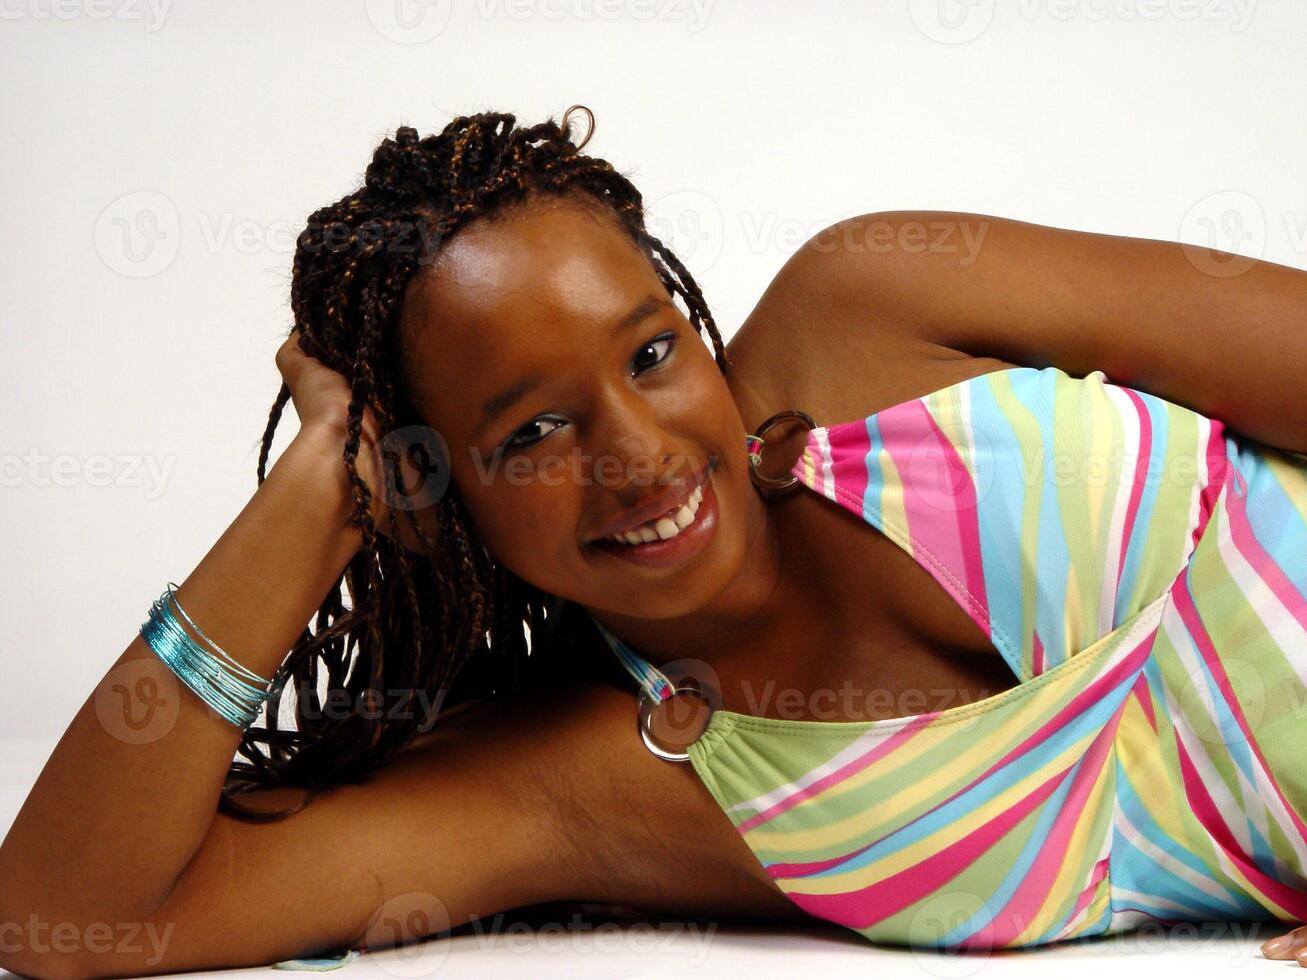 African American Teen Girl Reclining and Smiling Colorful Top photo